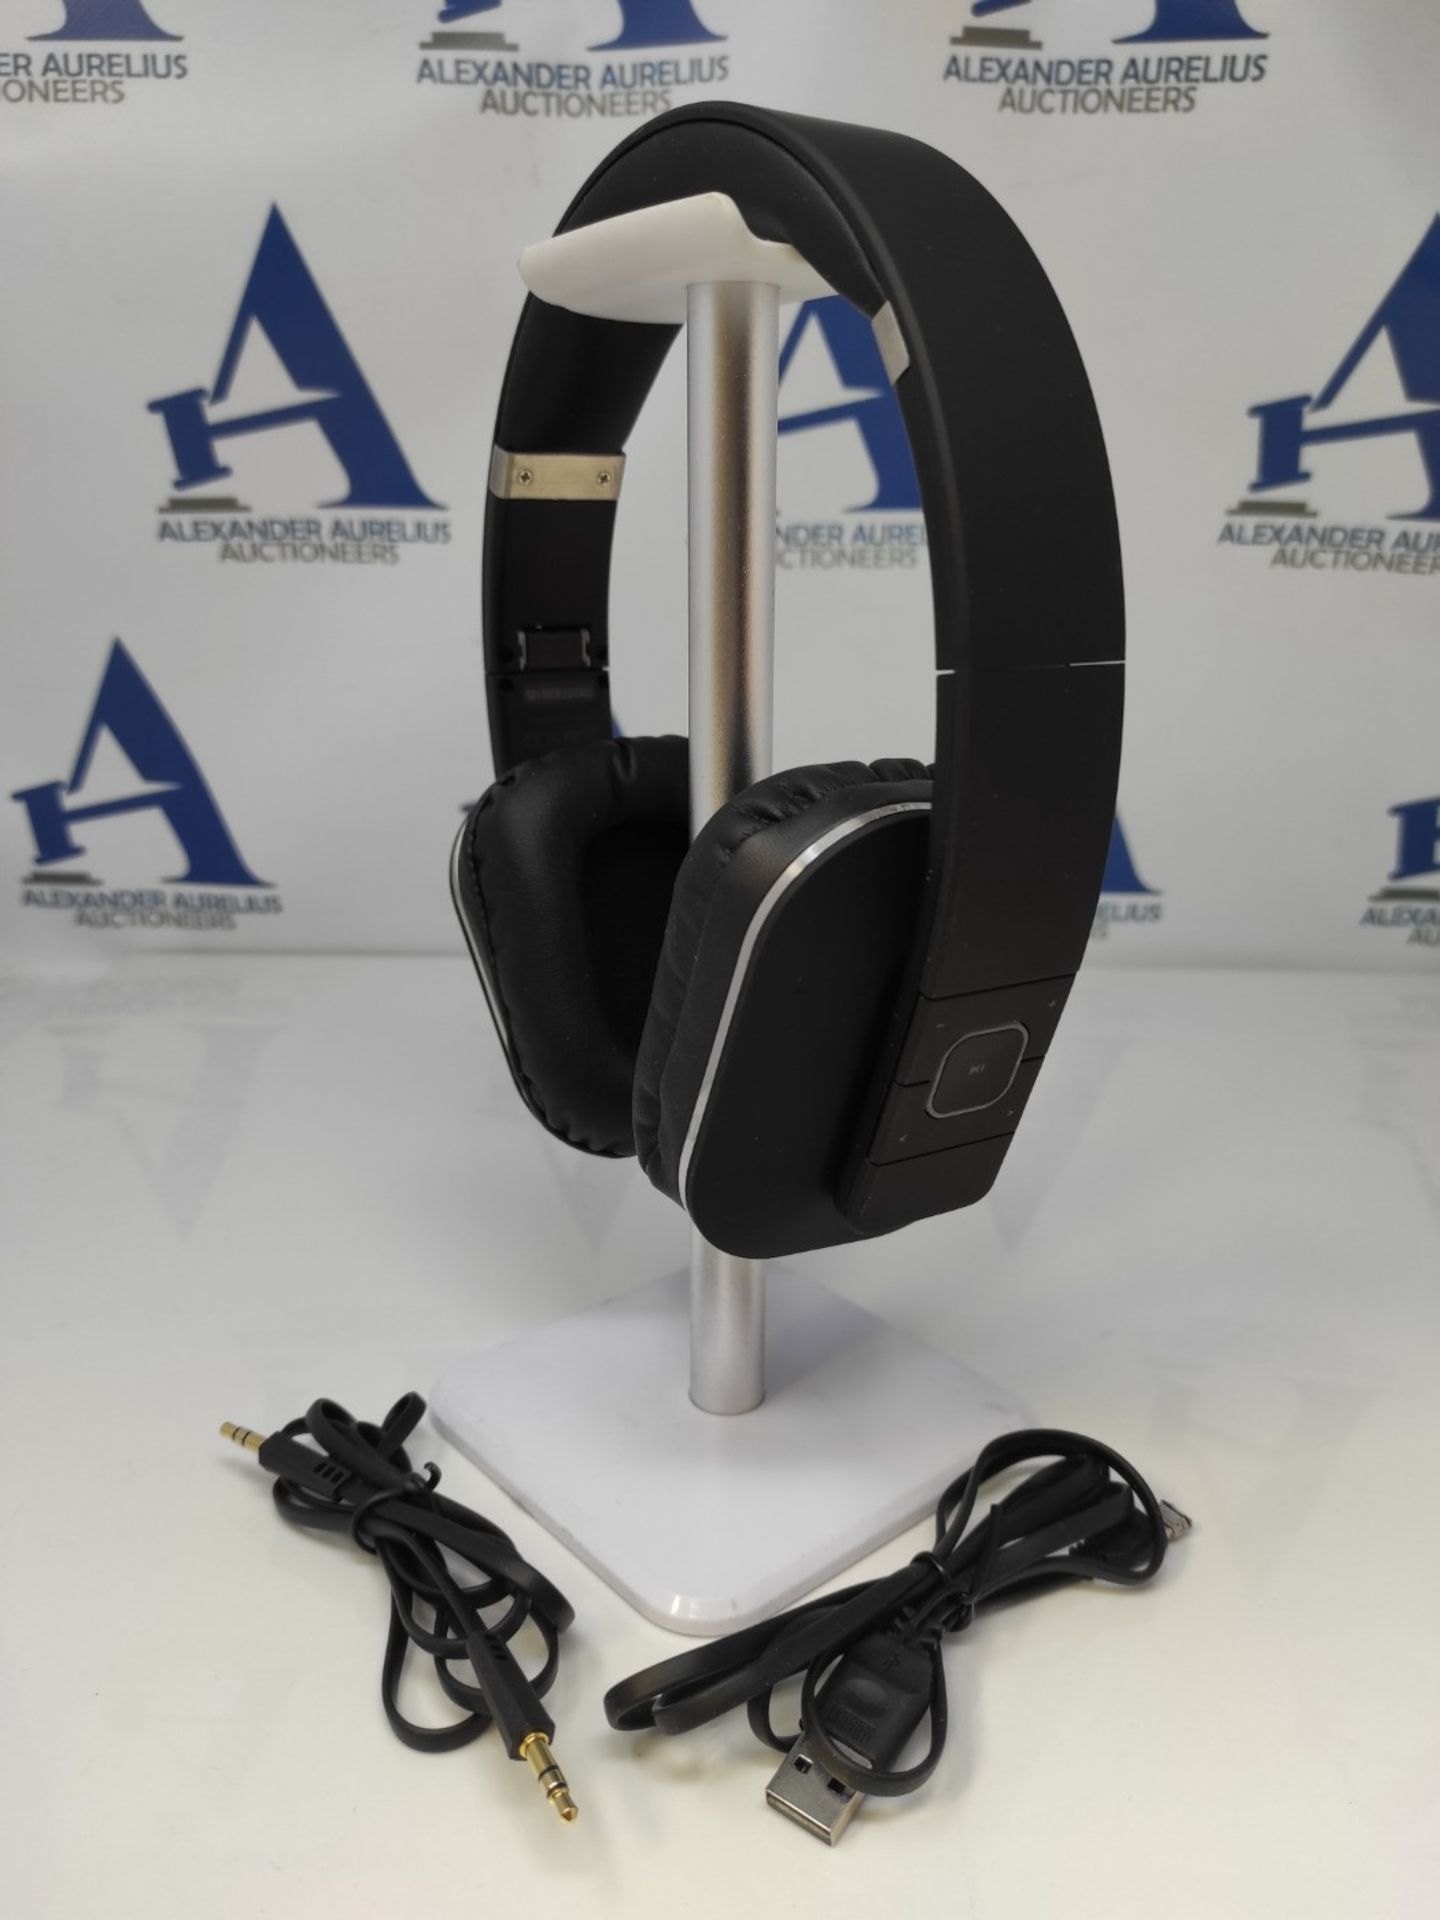 Wireless Bluetooth Headset 4.2 aptX Low Latency - August EP650 - Over Ear, Lightweight - Image 3 of 3